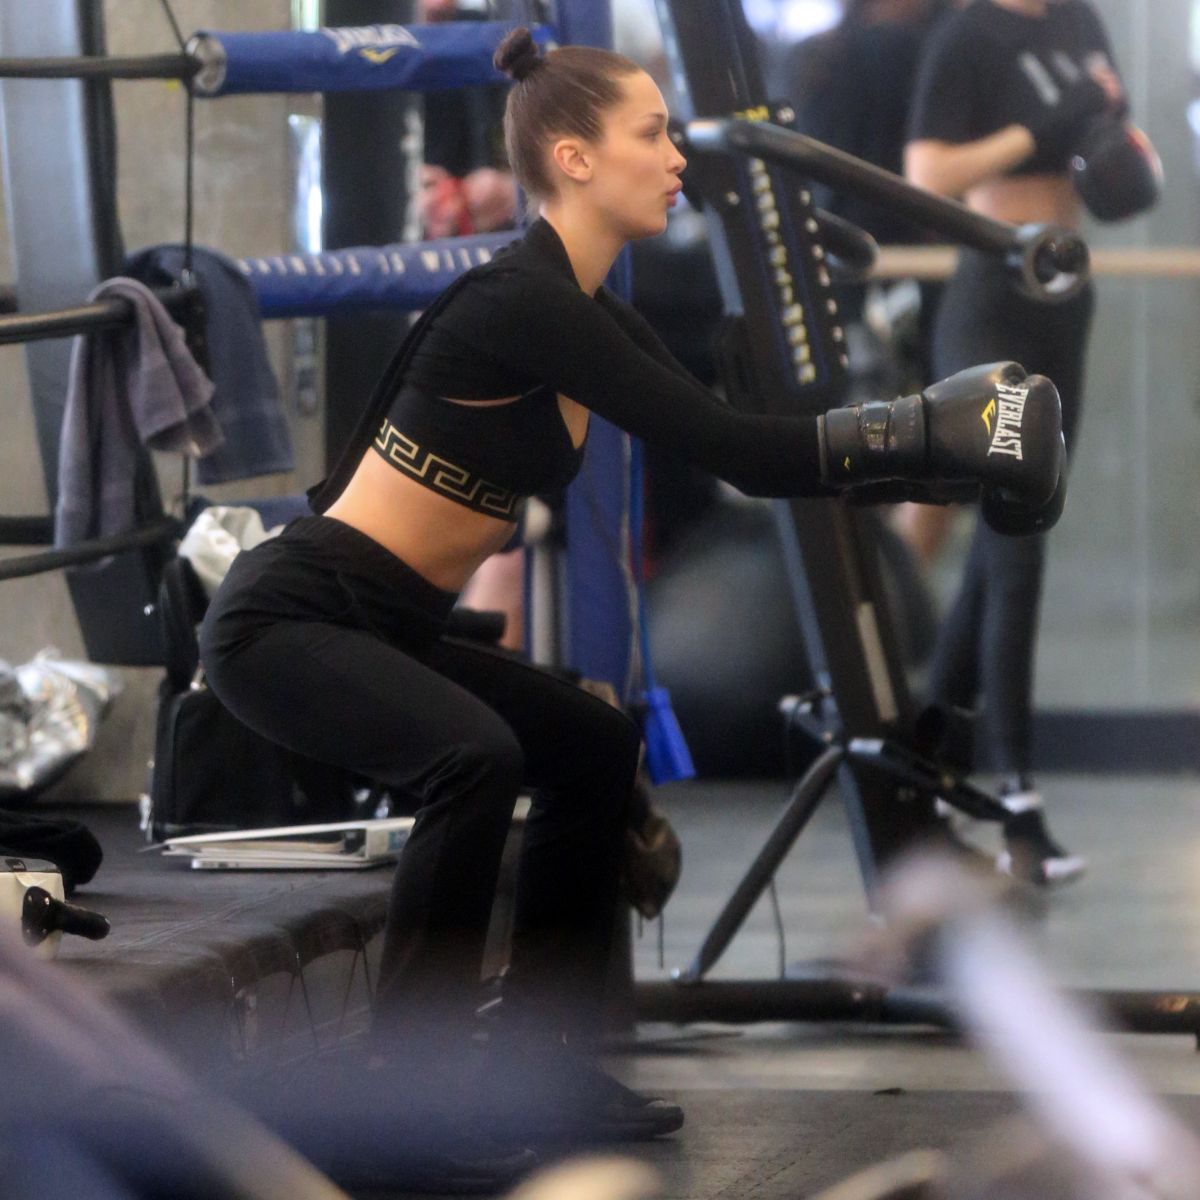 bella-and-gigi-hadid-working-out-at-gotham-gym-in-new-york-01-15-2017_9